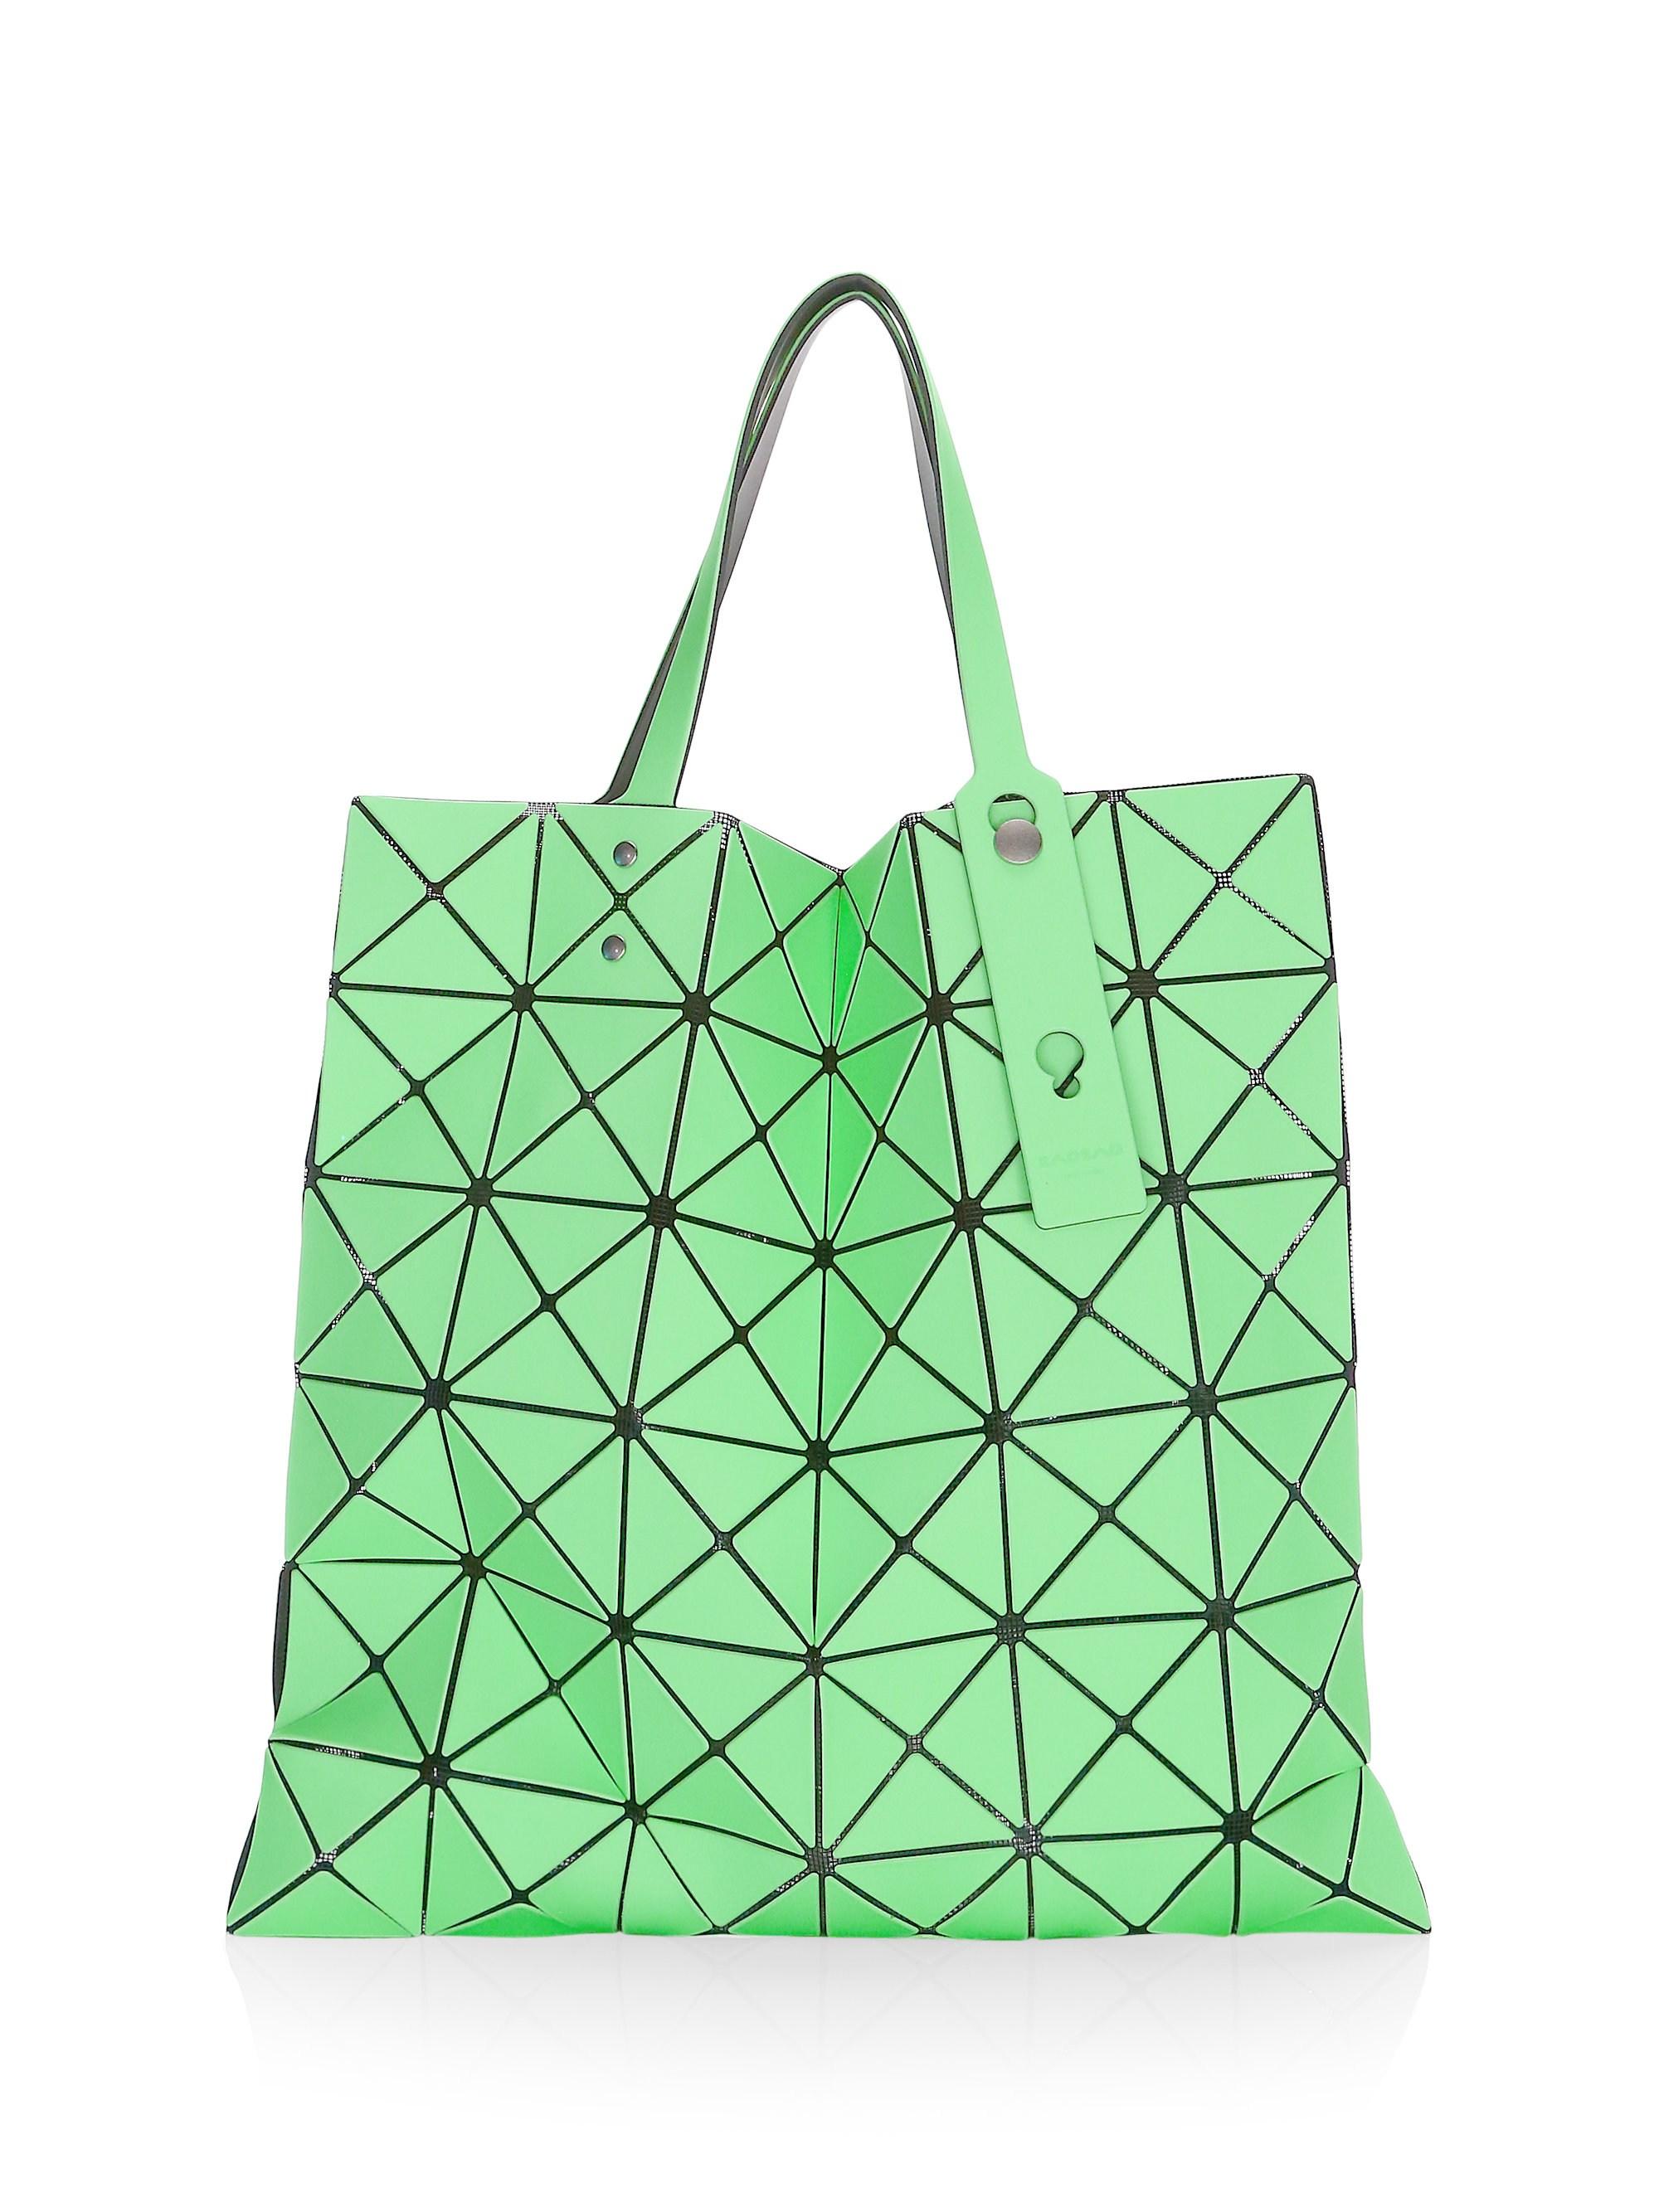 Bao Bao Issey Miyake Lucent Frost Tote in Green - Lyst